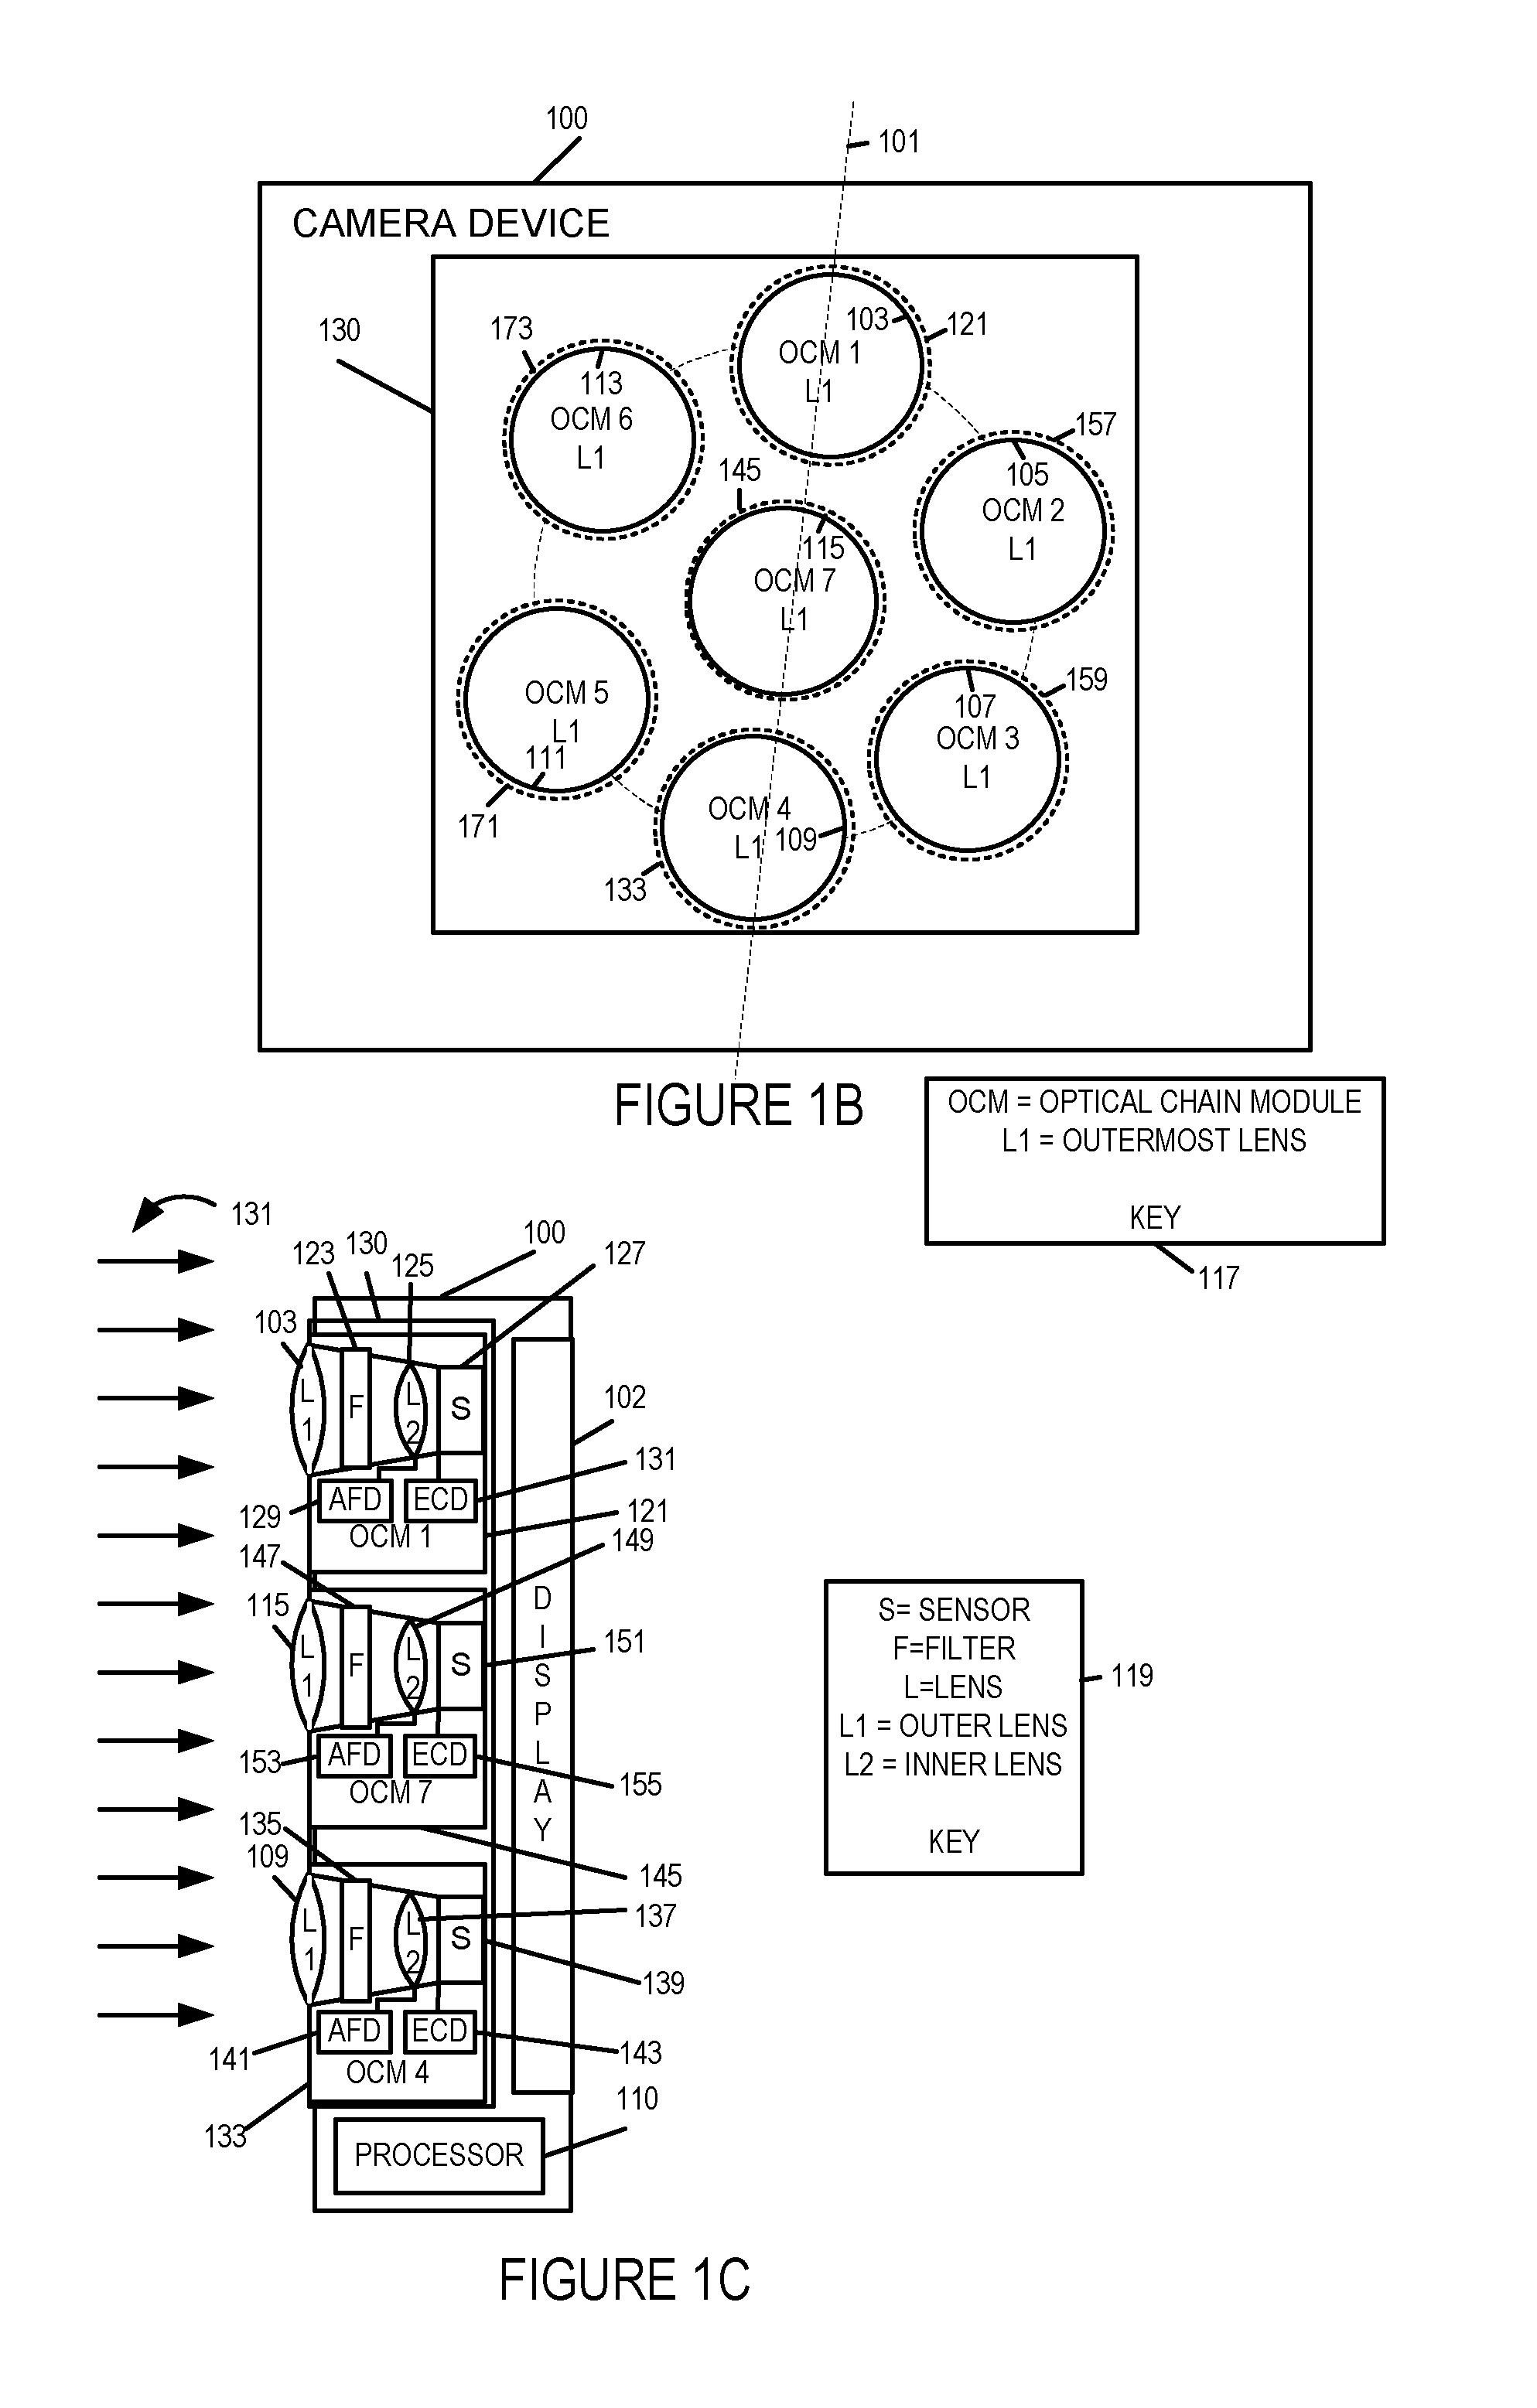 Camera methods and apparatus using optical chain modules which alter the direction of received light